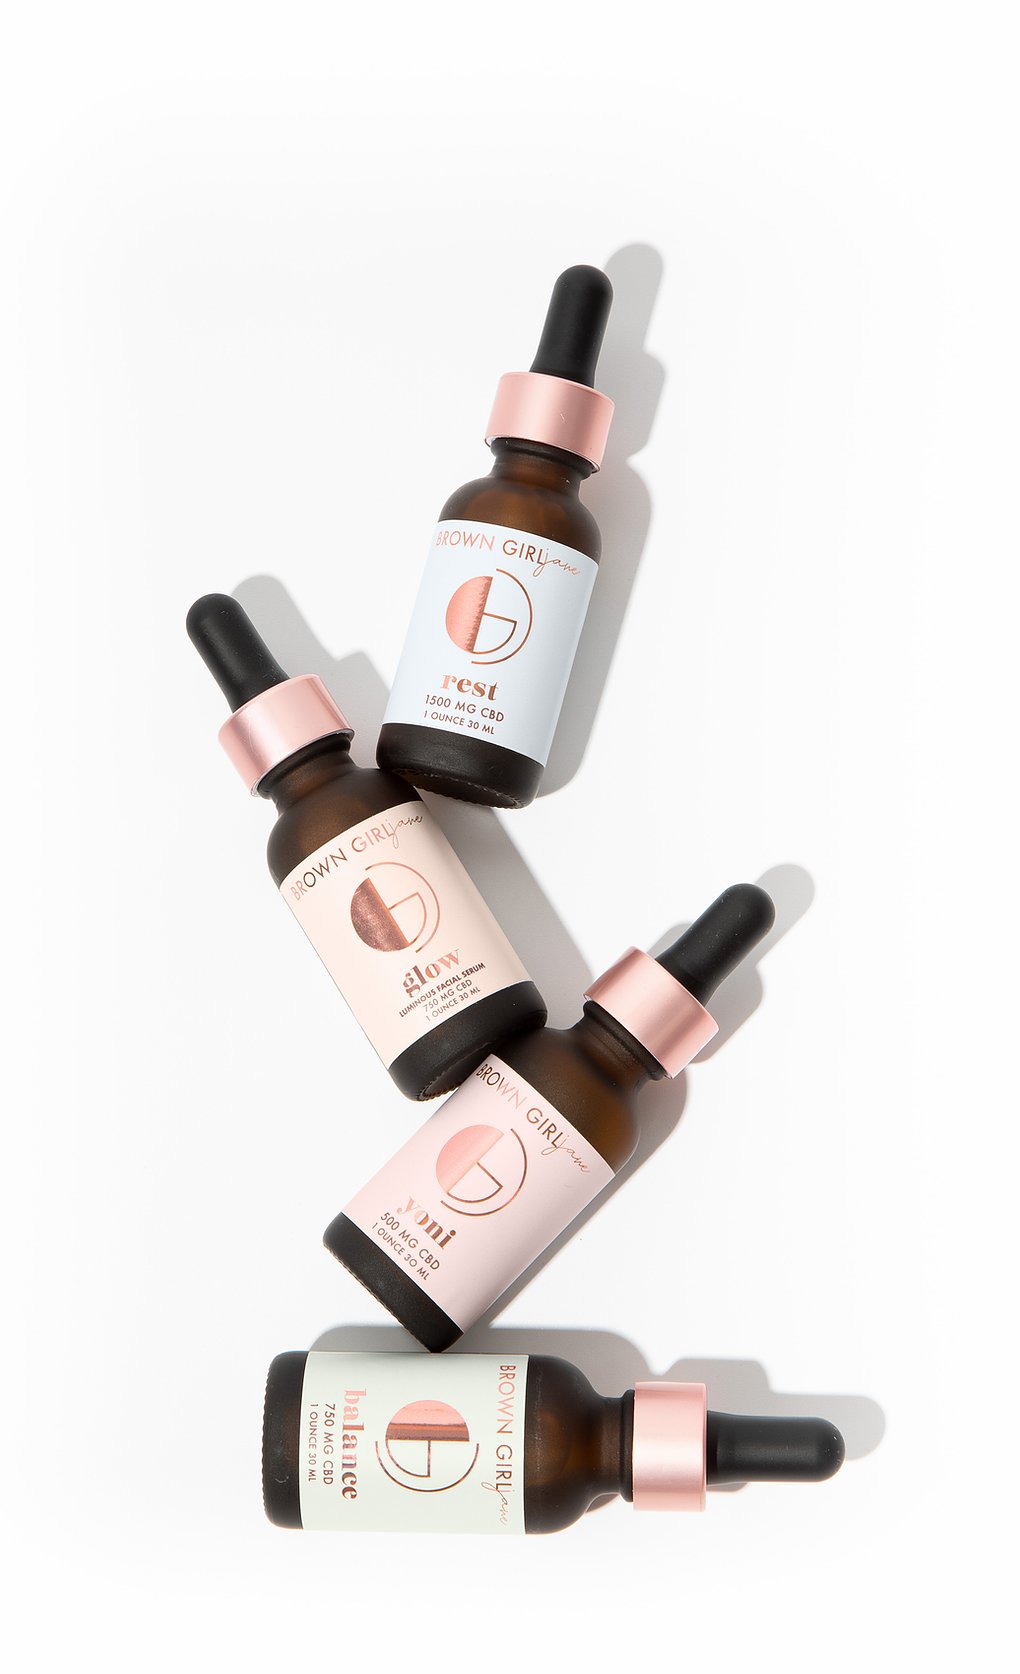 Our top 10 holiday gifts for women in 2020: CBD Oil from Brown Girl Jane | Small Business Holiday Gift Guide